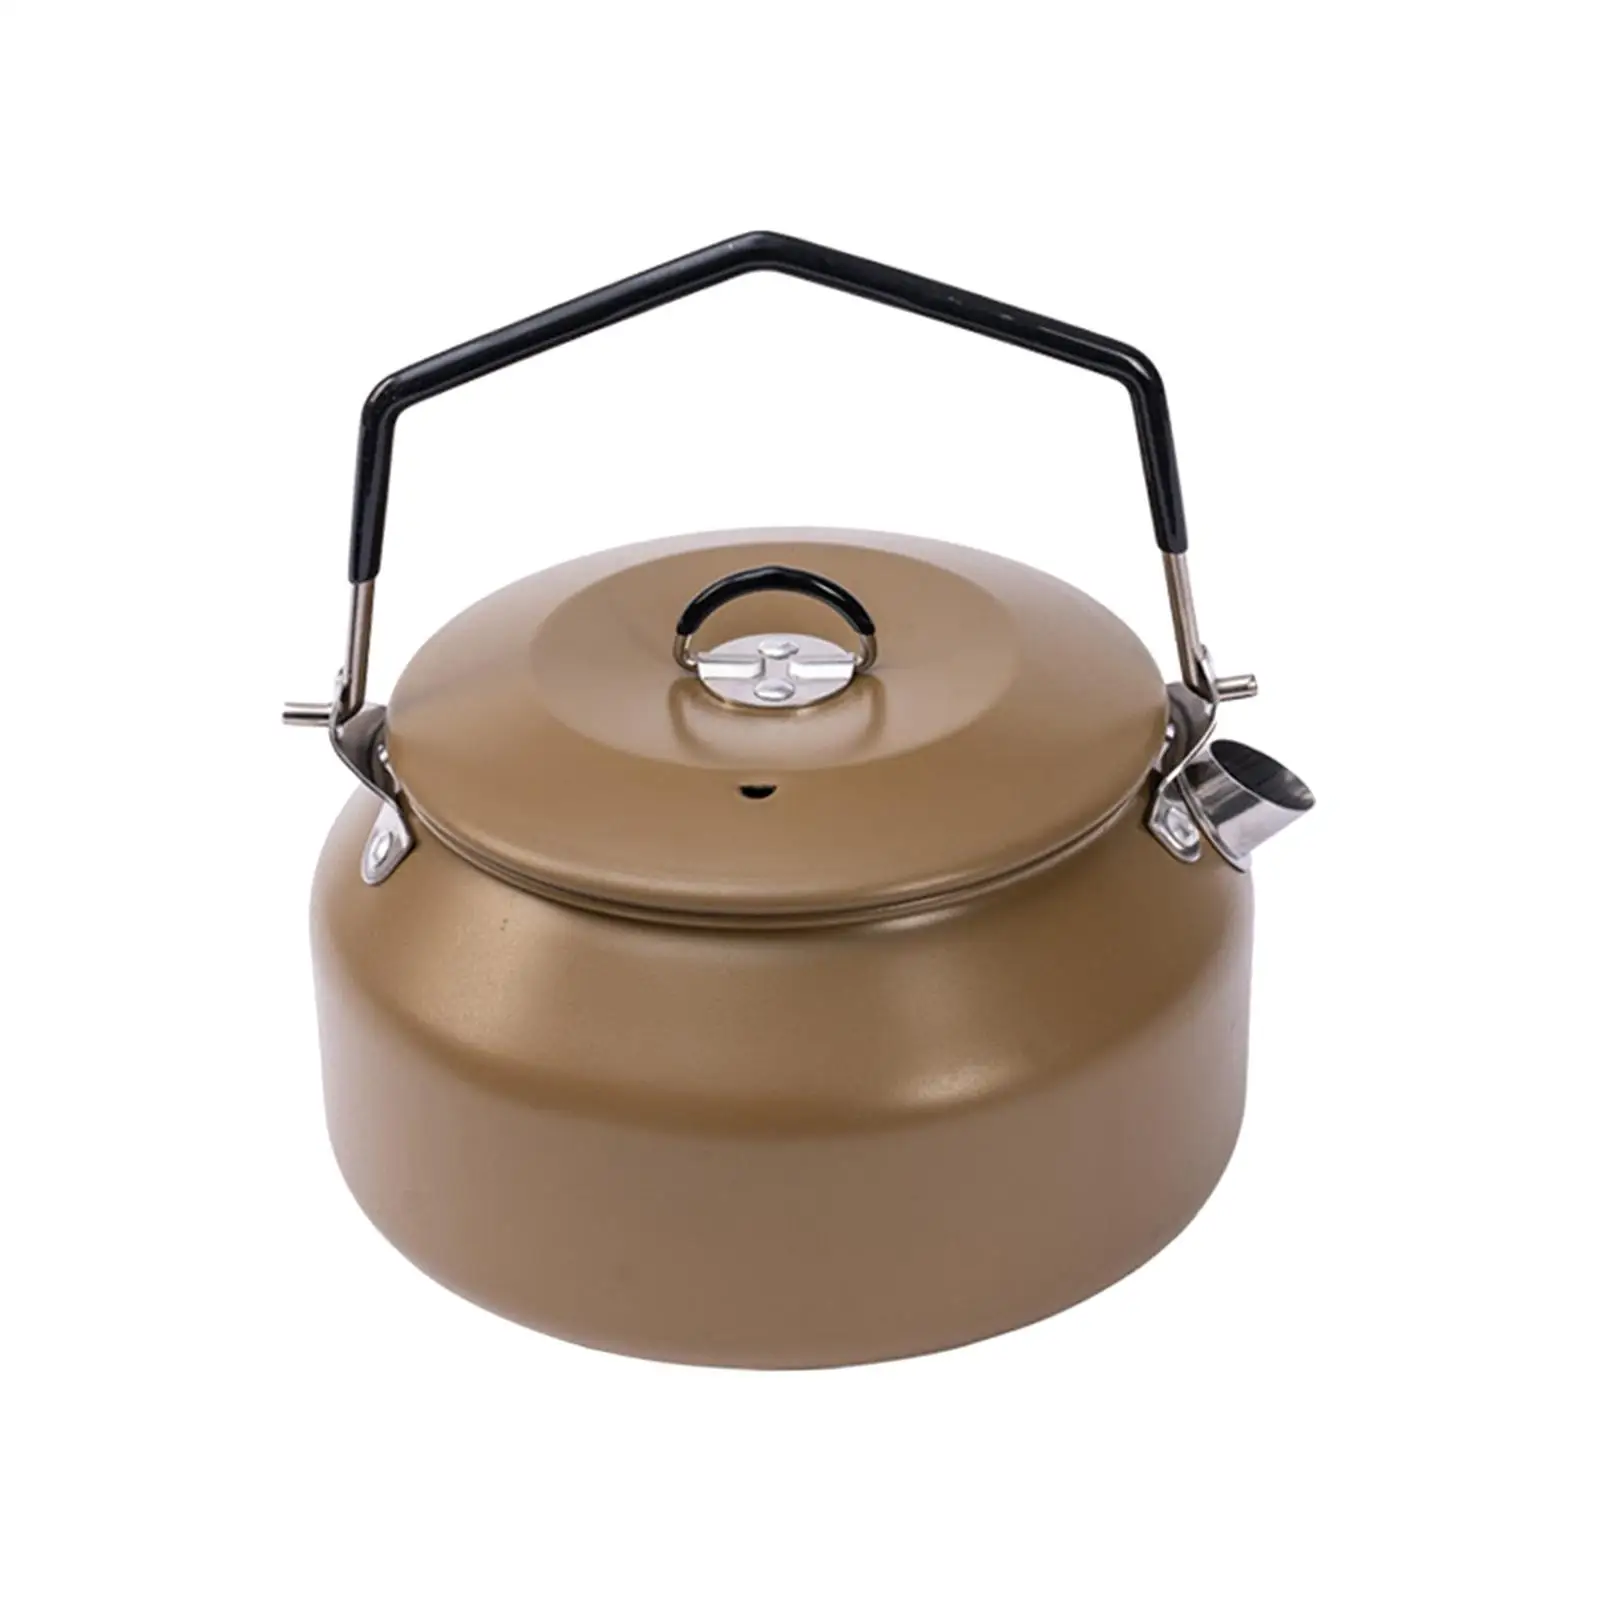 1L Camping Water Kettle Tea Pot Teapot Coffee Pot Anti Scald and Lockable Handle Boiling Water Teakettle for Barbecue Outdoor